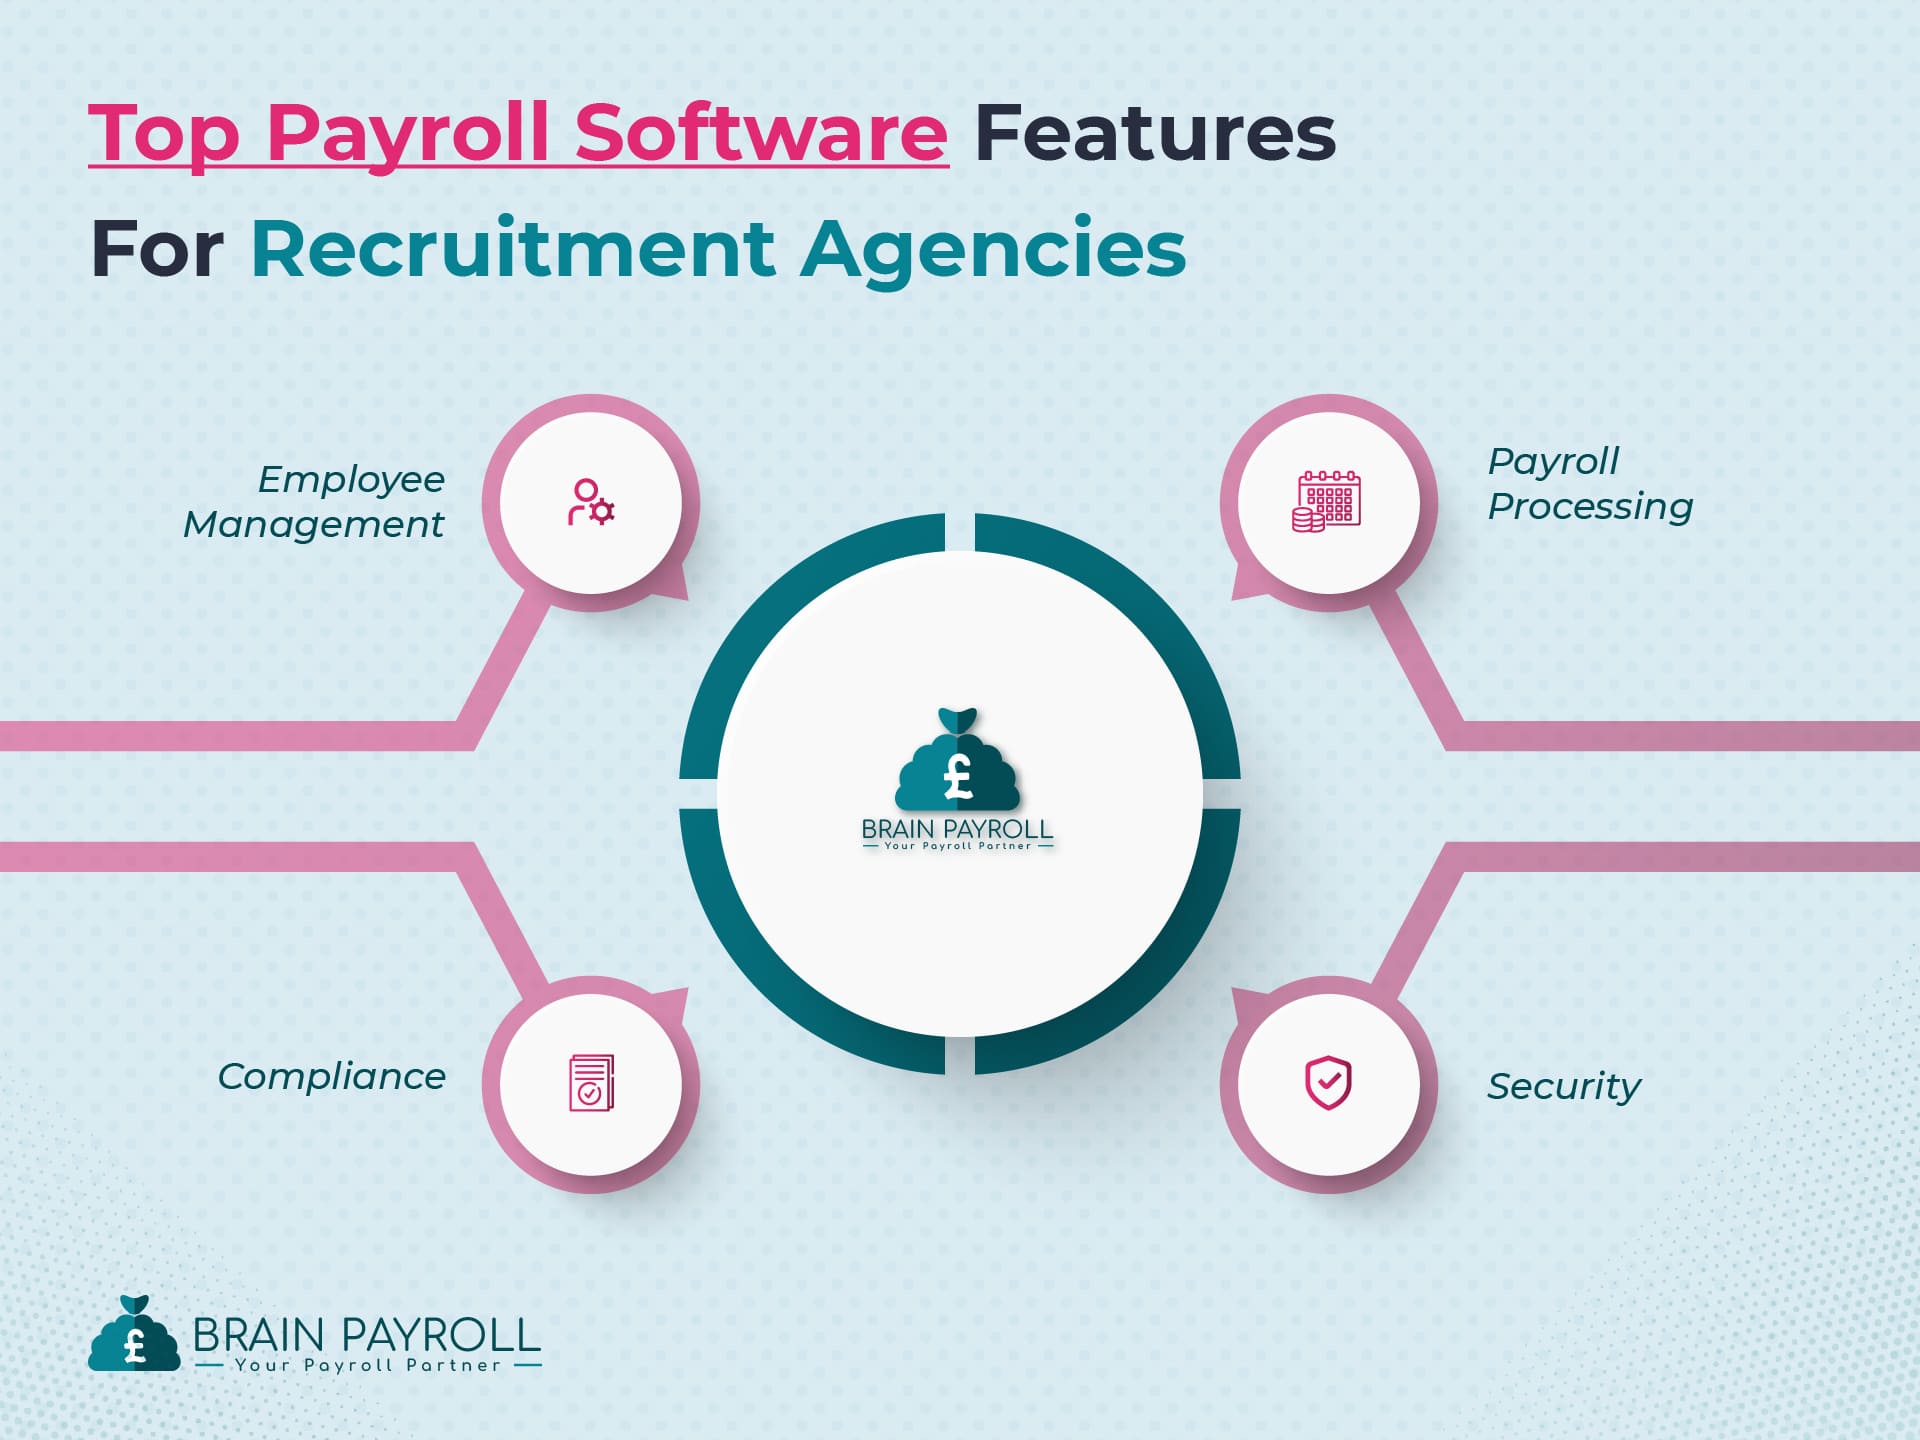 Top Payroll Software Features for Recruitment Agencies